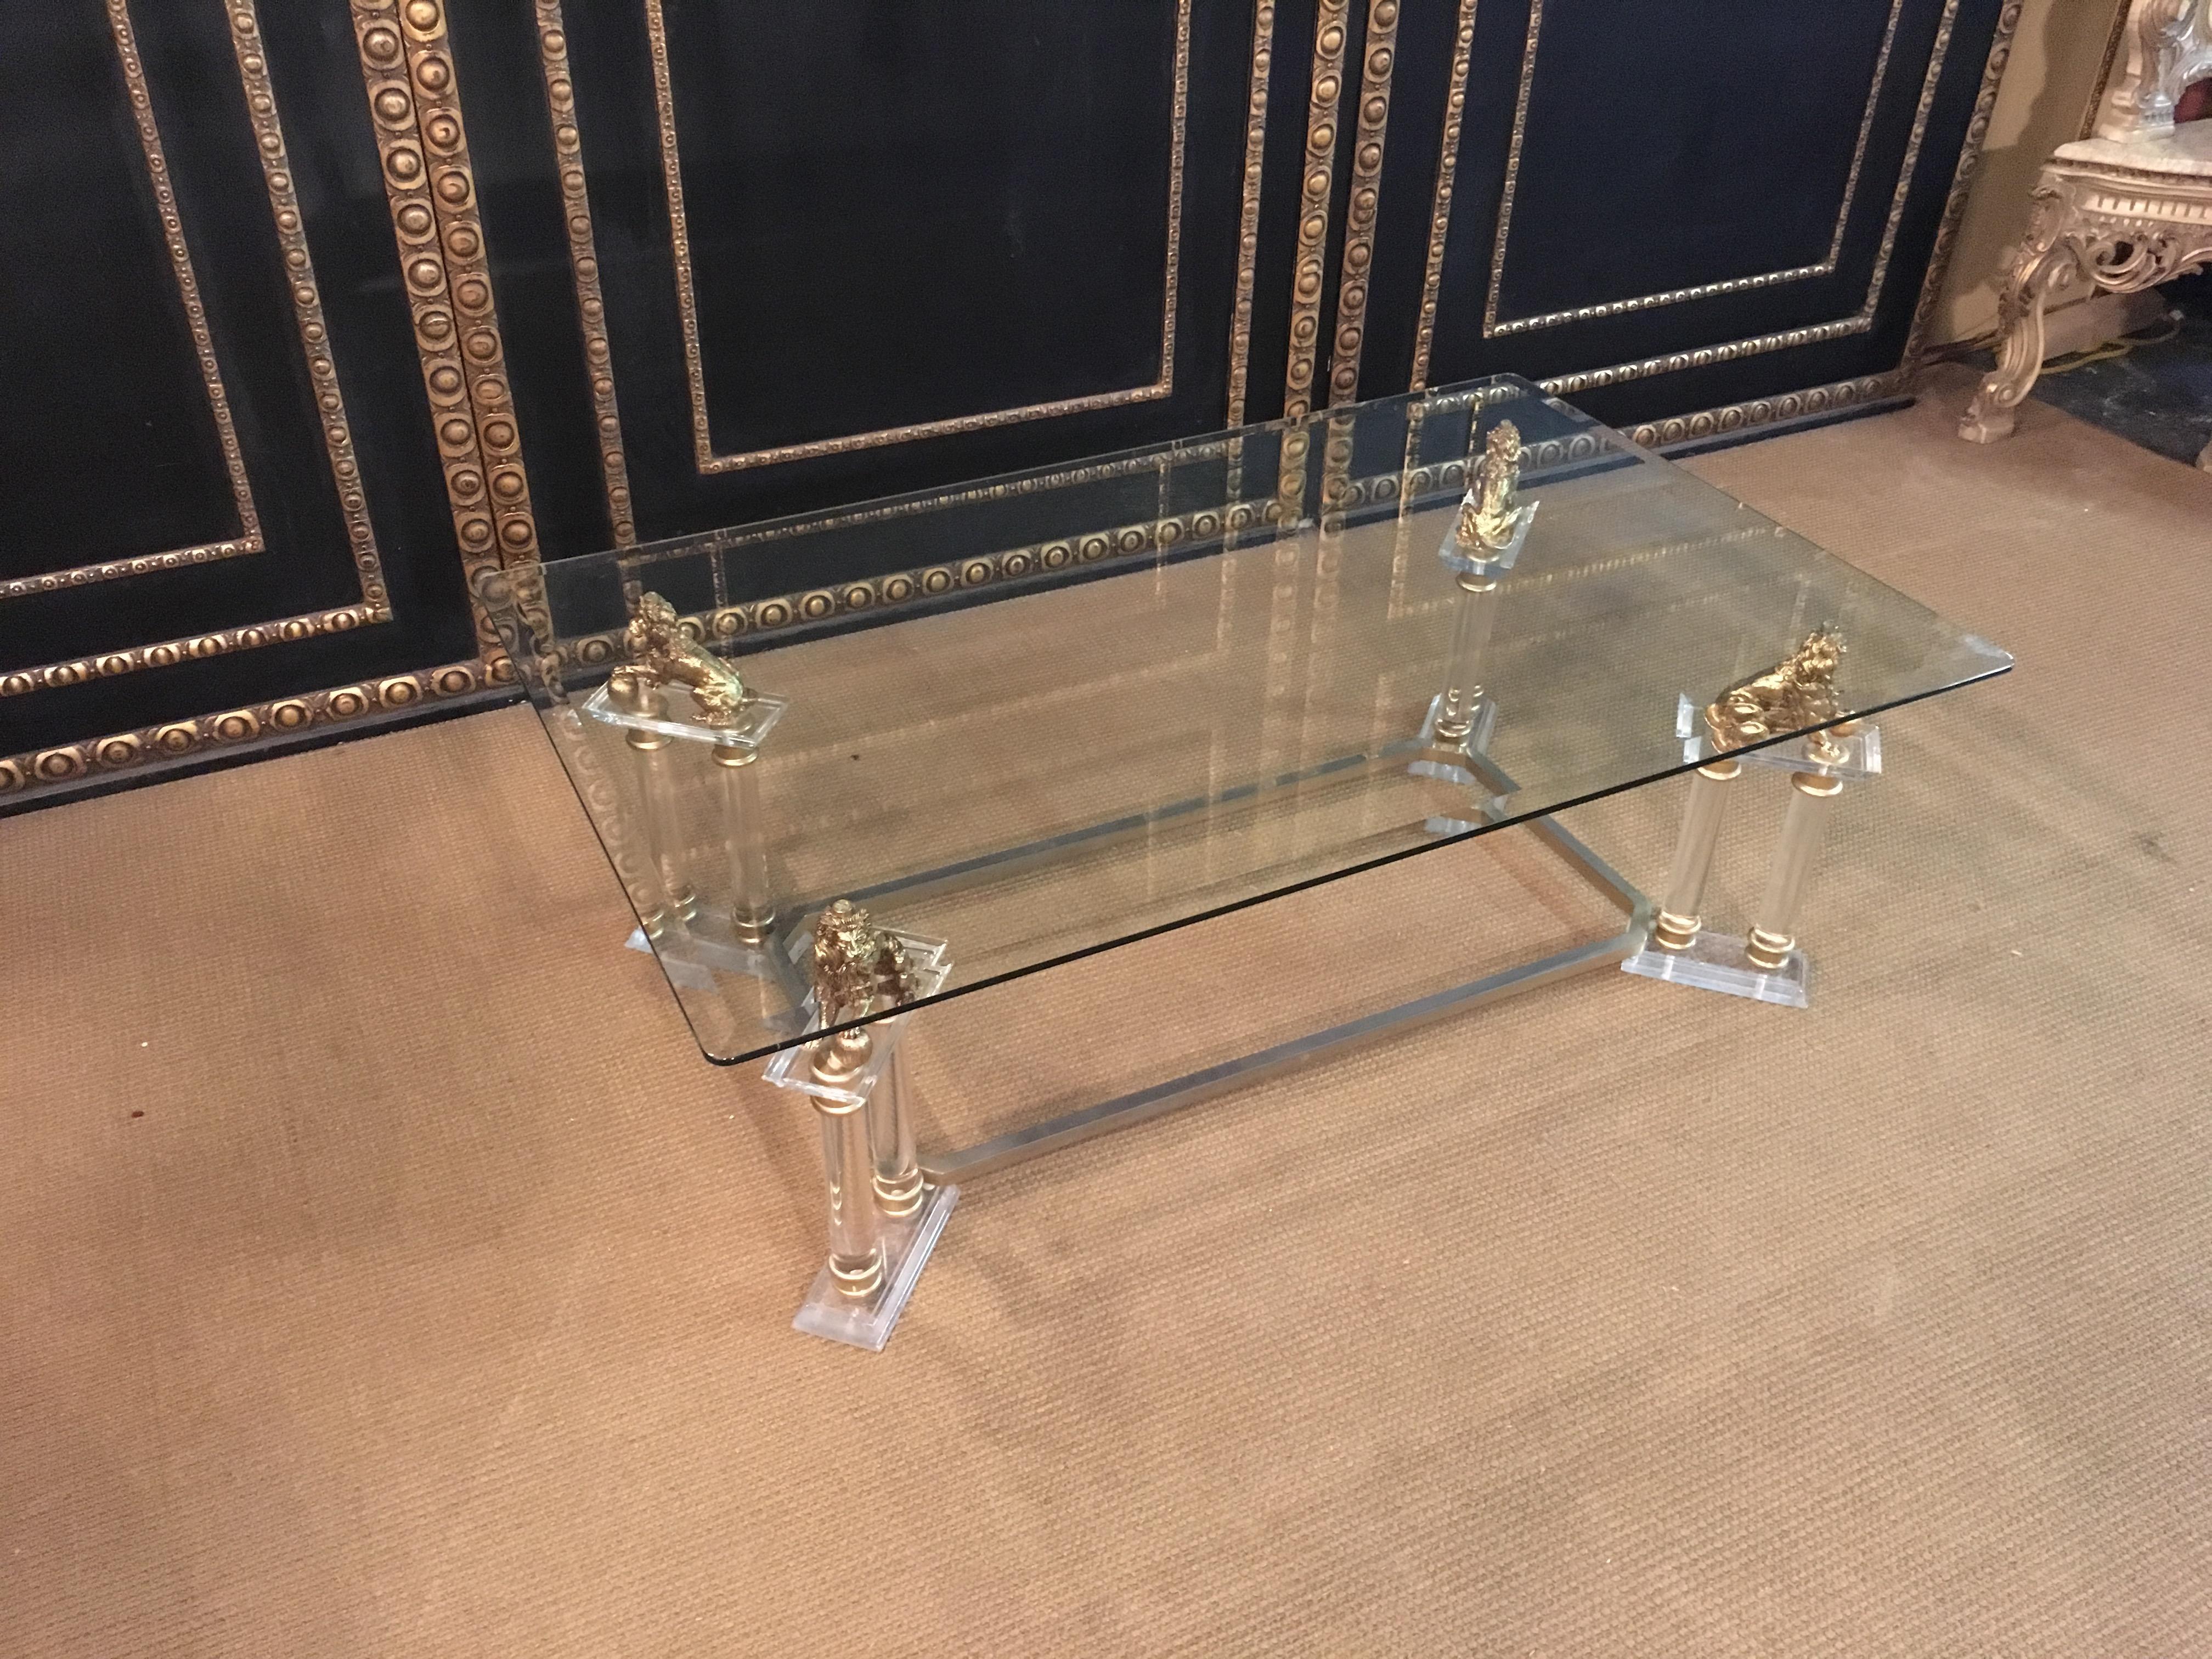 Glazed 20th Century Acrylic Table with 4 Lions Table, Empire Style